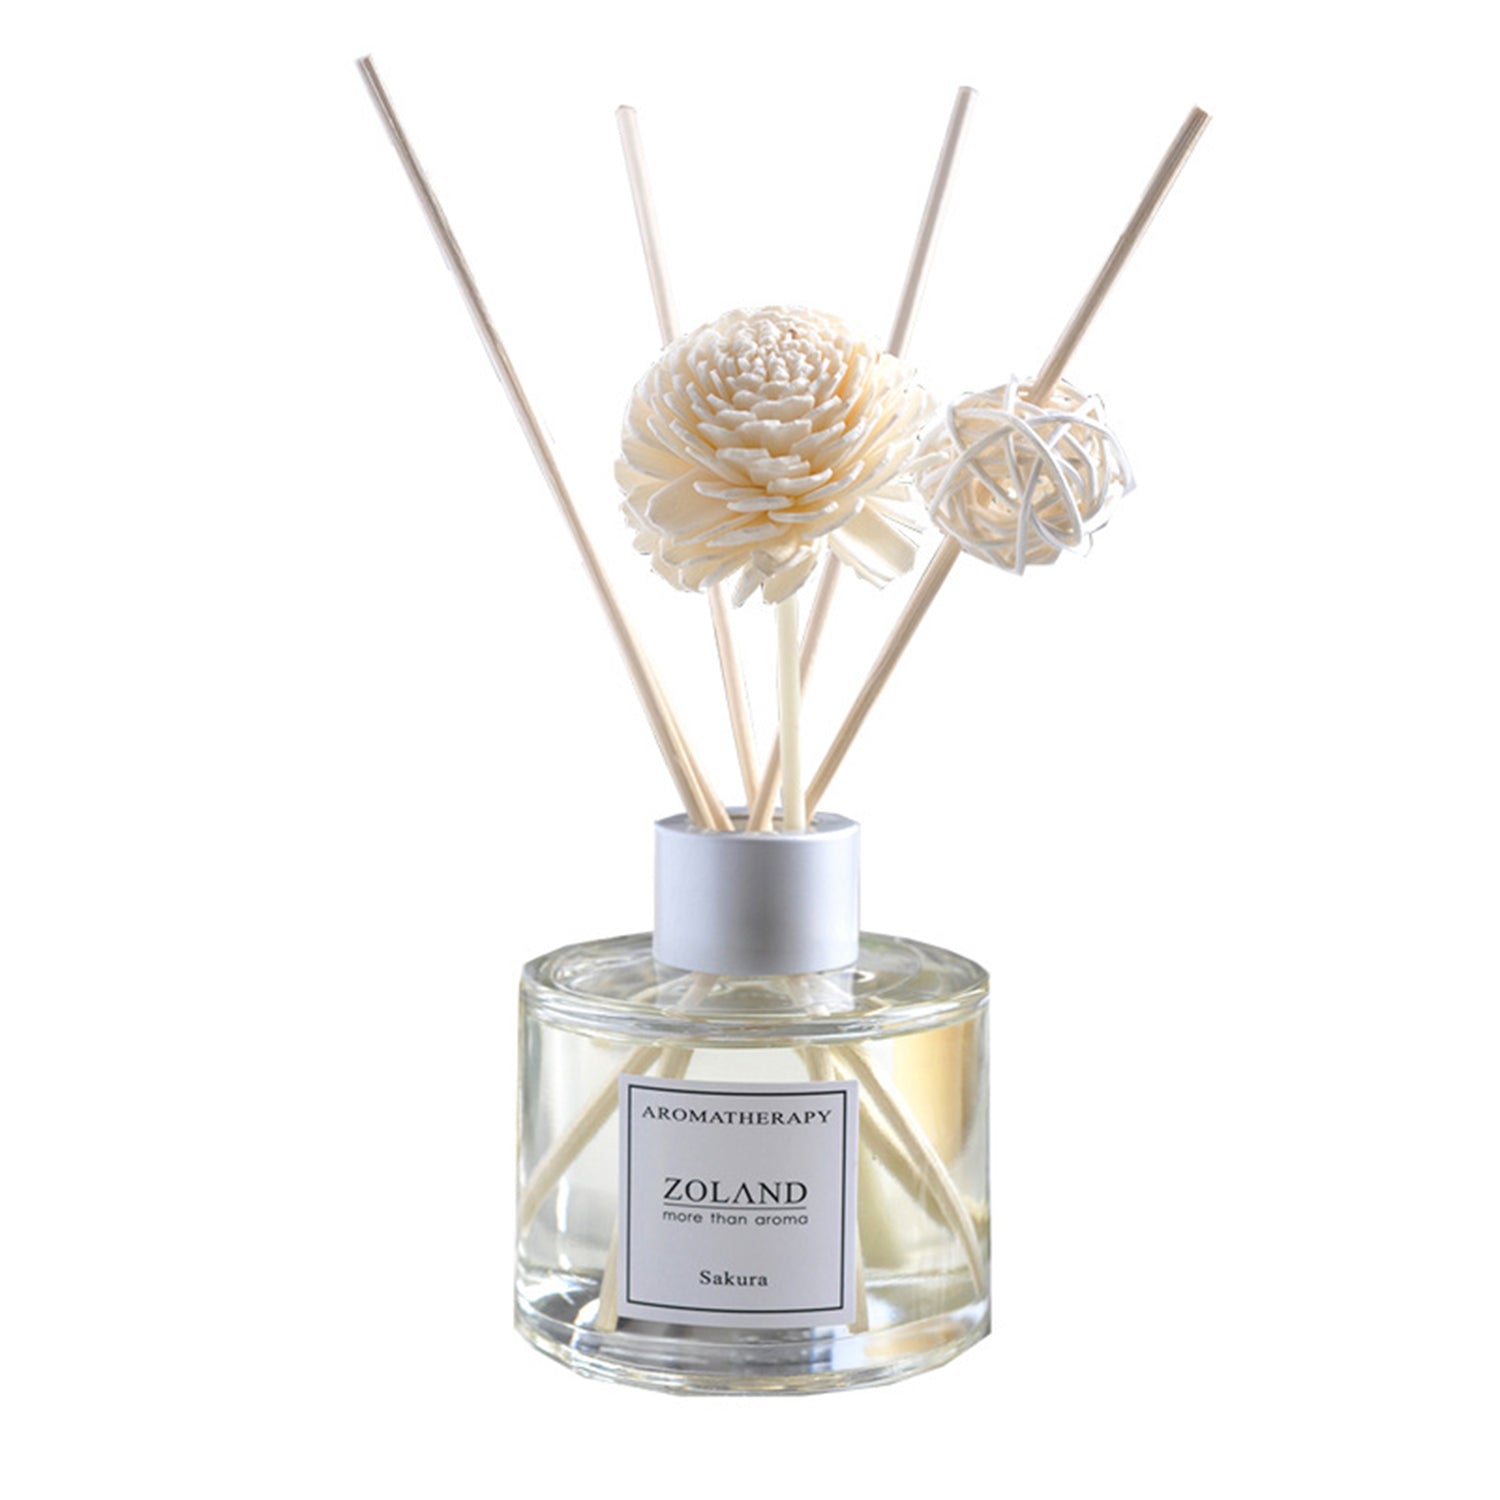 ZOLAND Reed Diffuser 125ML Premium Essential Oil Aromatherapy Round Bottle with Reed Stick and Sola Flower Reed Diffuser ZOLAND Sakura 